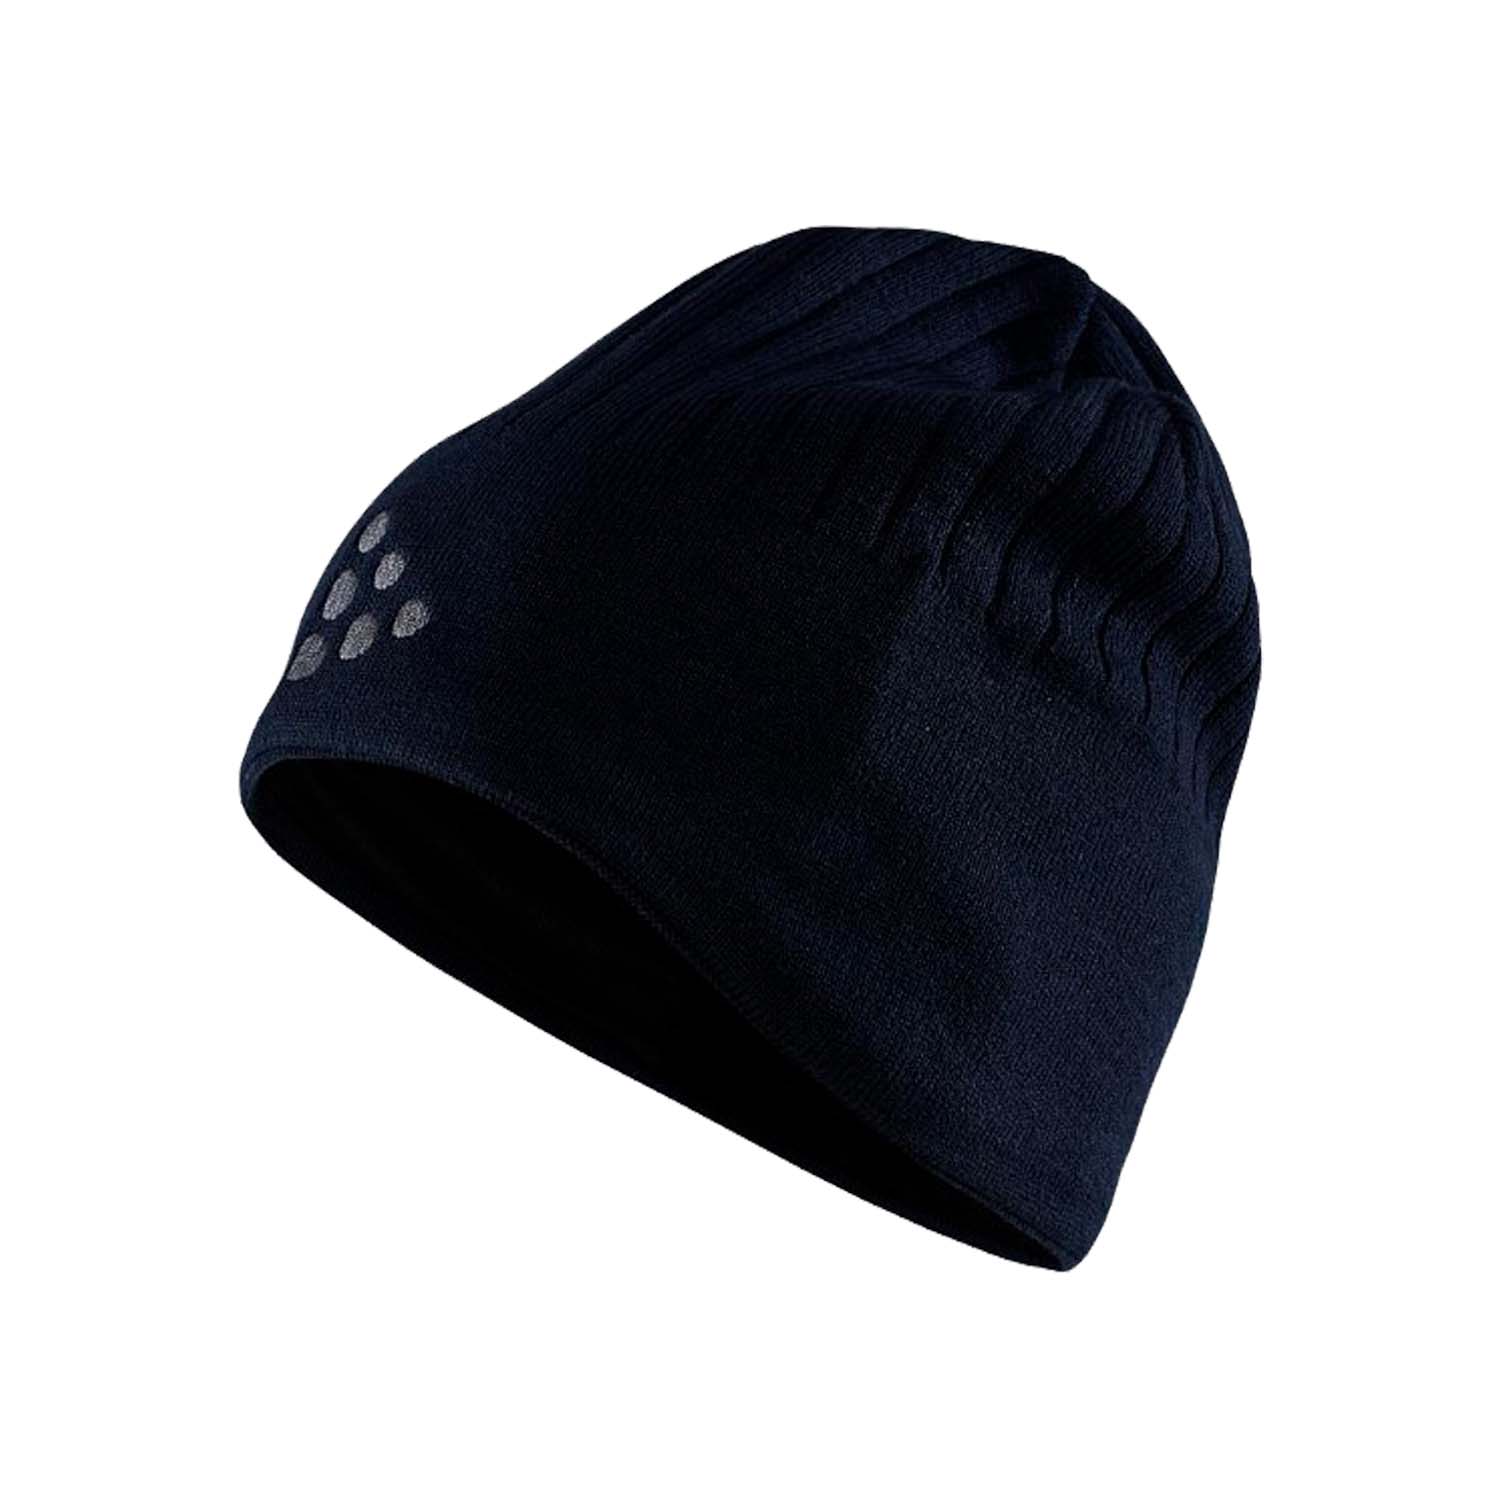 Unisex Outdoor Bonnet Skiing Hats Stretchable Knit Fabric Hip Hop Cap for  Football Game Ice Skating Snowboarding Black